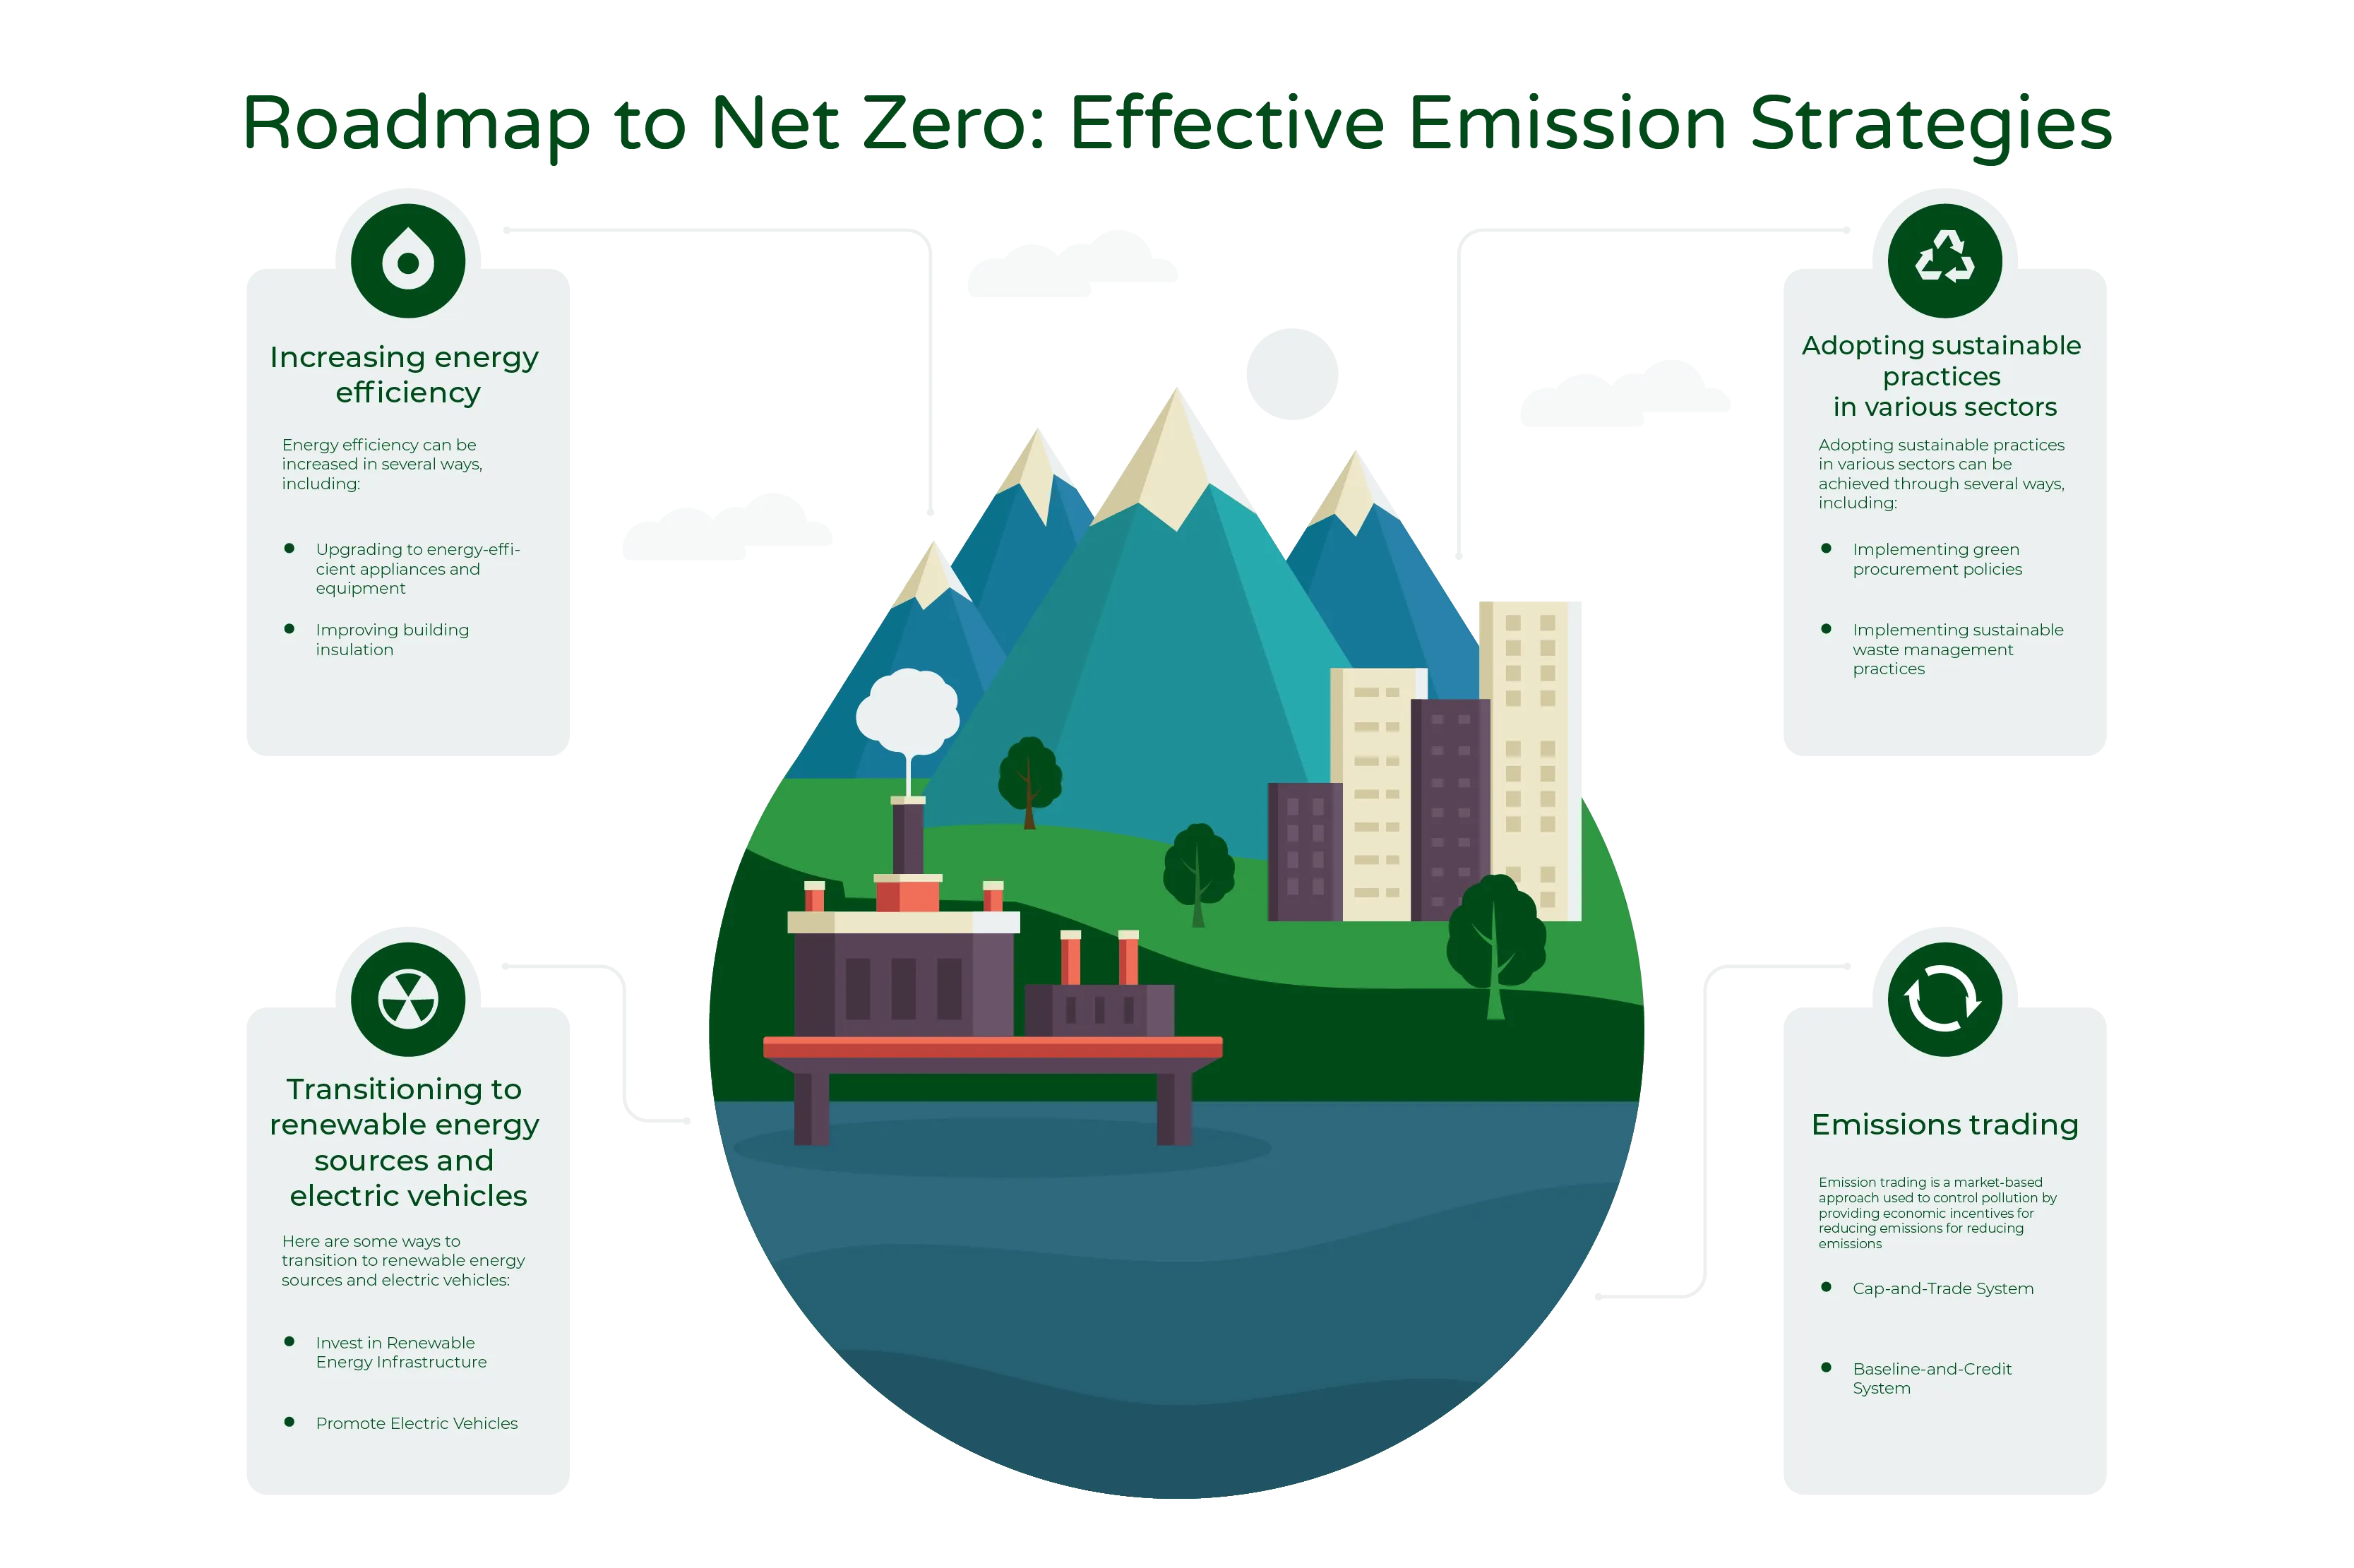 "Illustration titled 'Roadmap to Net Zero: Effective Emission Strategies.' The illustration depicts a globe at the center, surrounded by four corresponding pages with information on key points. The globe has blue-colored water, and there are off-white buildings, green and blue mountains, and an industrial area with smoke-colored clouds emitting from it. The four edges of the illustration represent the following strategies: 1) Increasing energy efficiency, 2) adopting sustainable practices, 3) transitioning to renewable energy sources and electric vehicles, and 4) emissions trading."